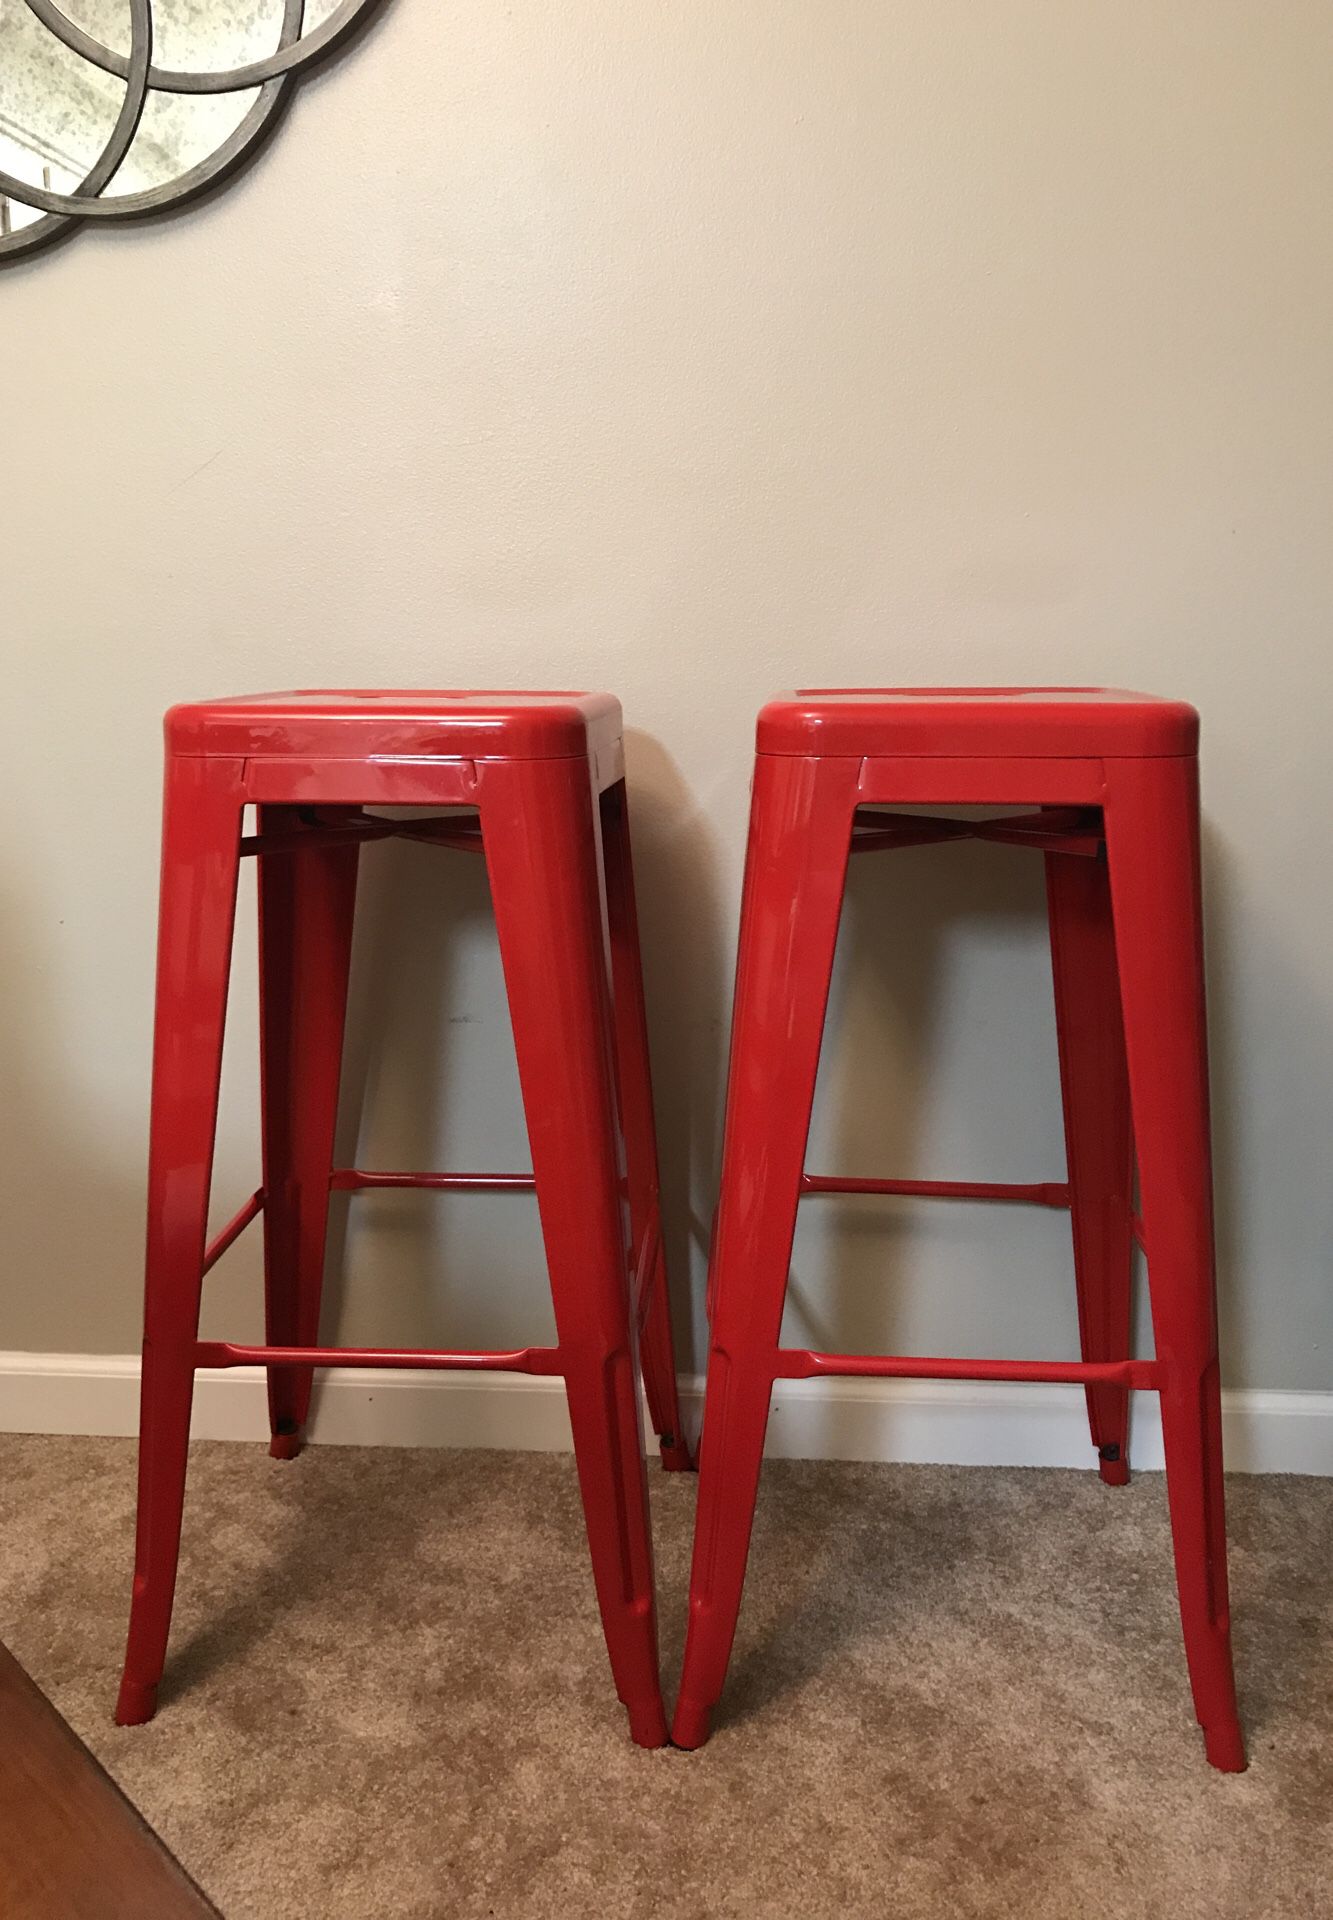 35$ for both! Medal bar height stools......!!!!